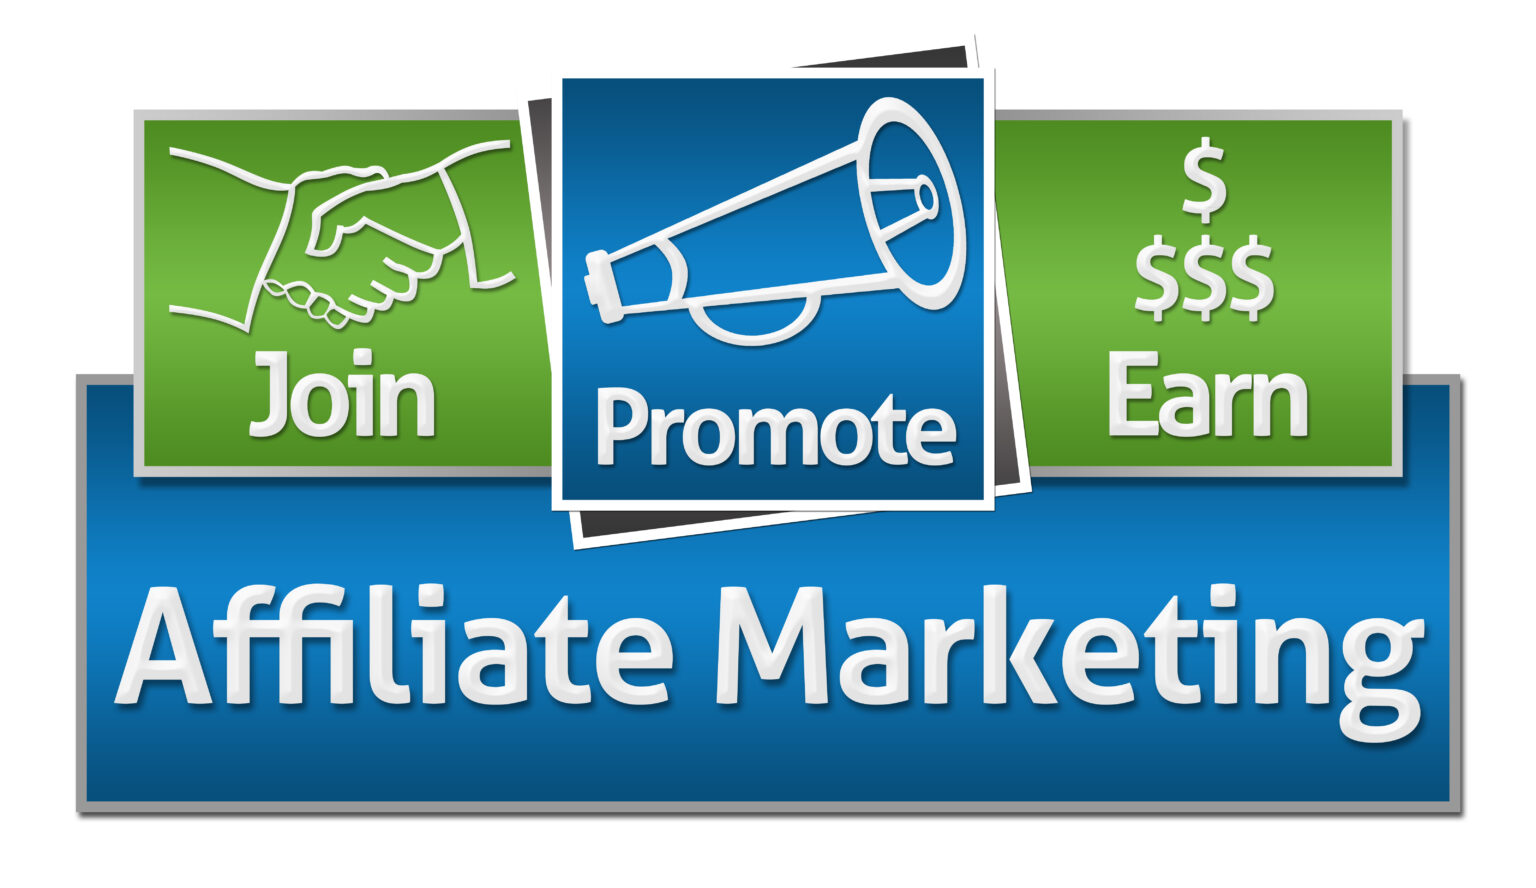 about us page generator for affiliate marketing